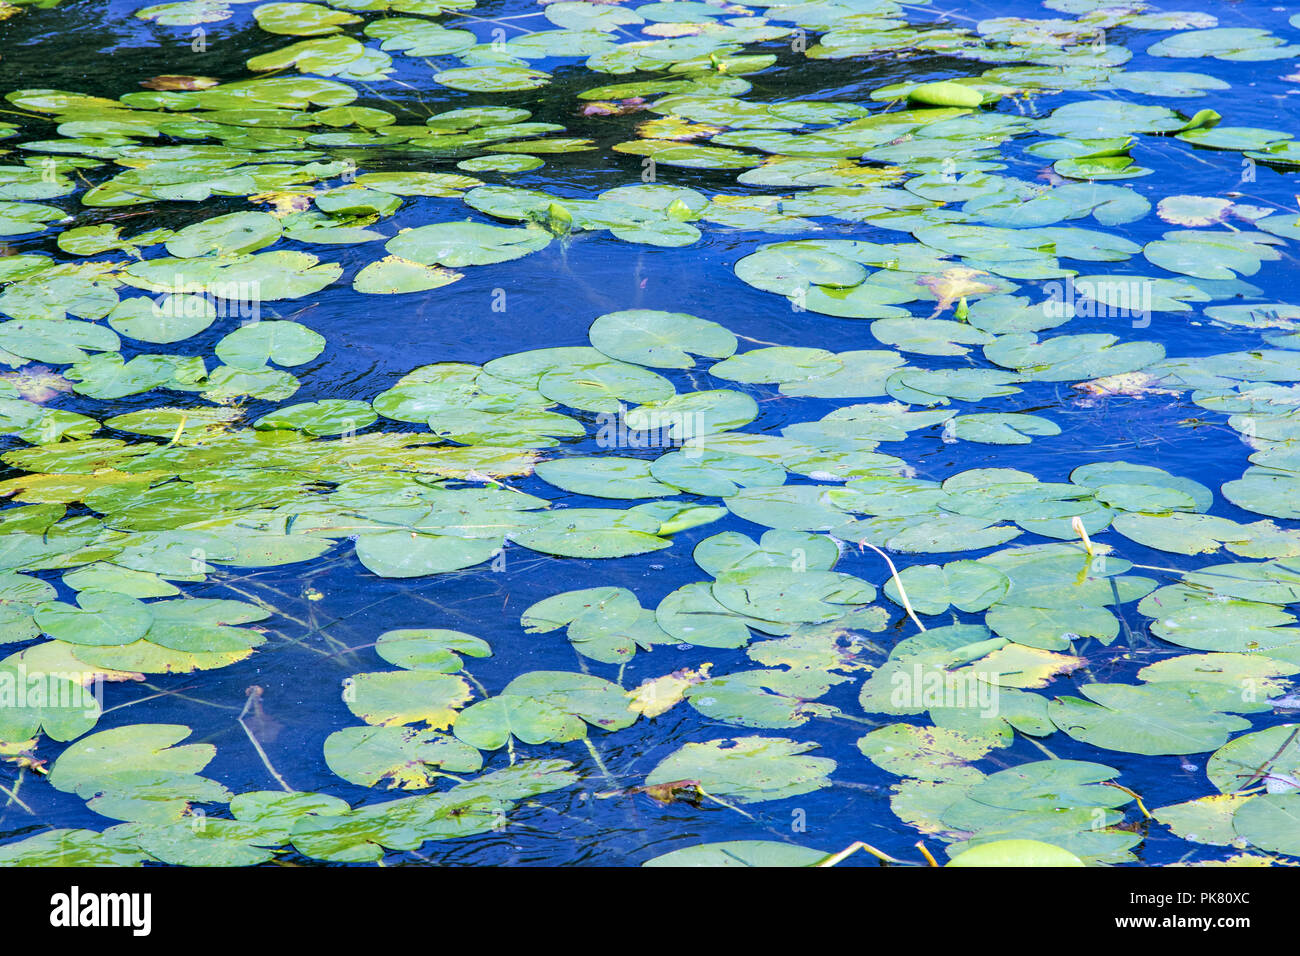 image background of green leaves of water lilies on water Stock Photo